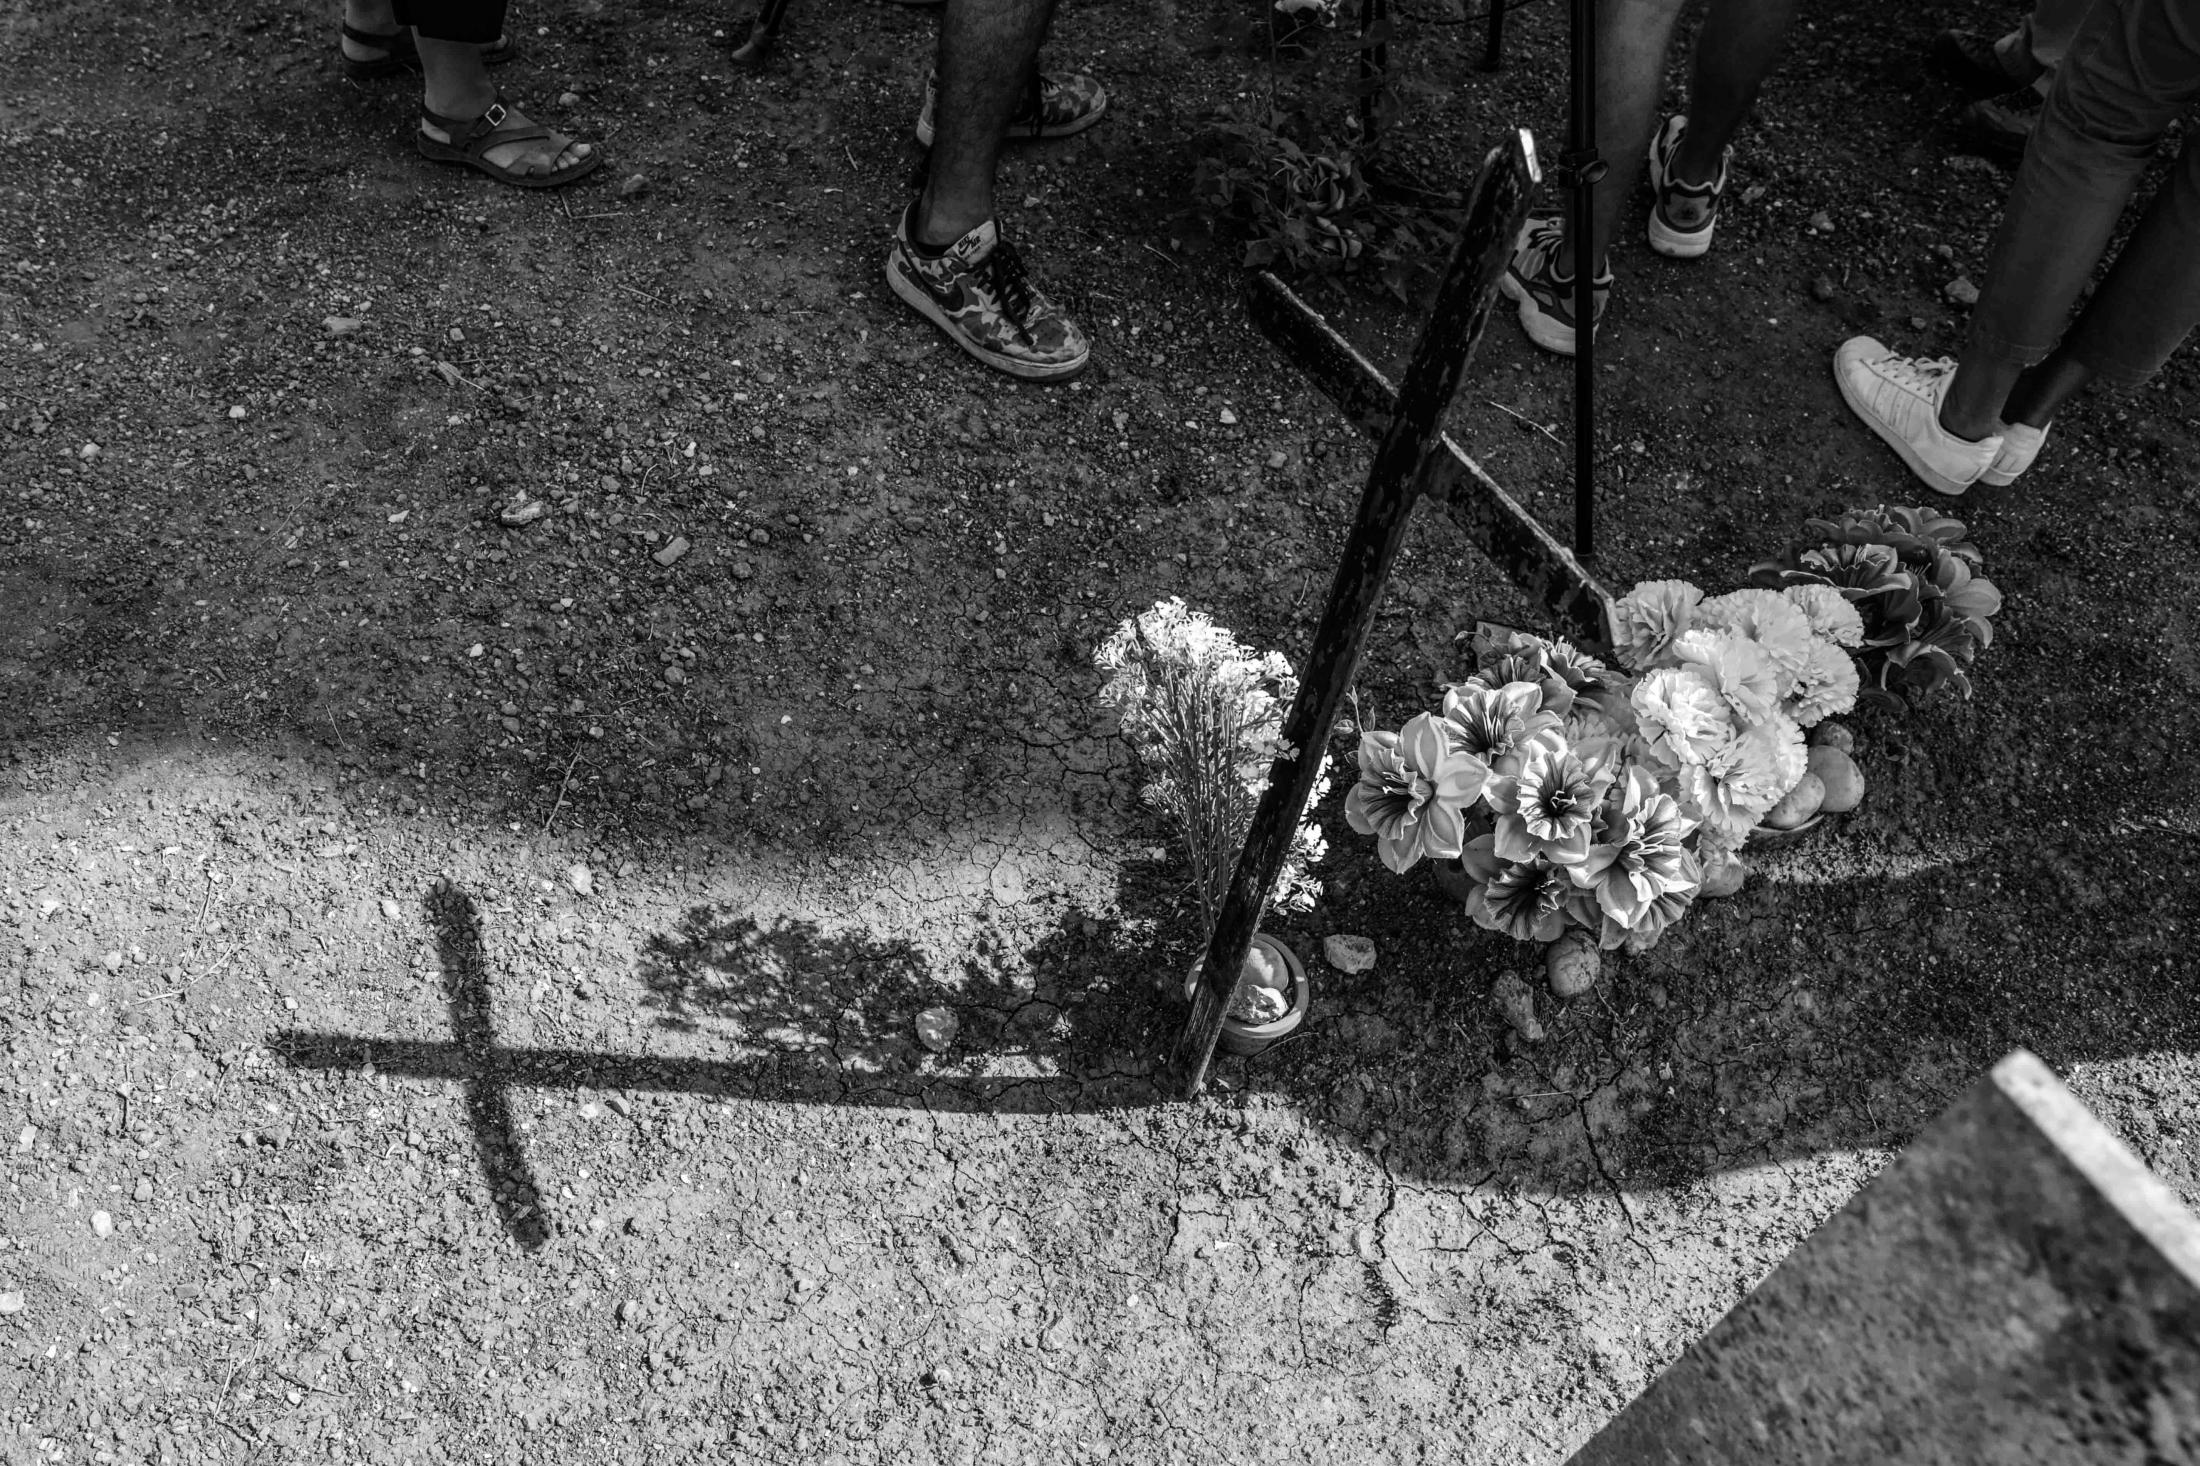 70 victims of the Franco regime - 